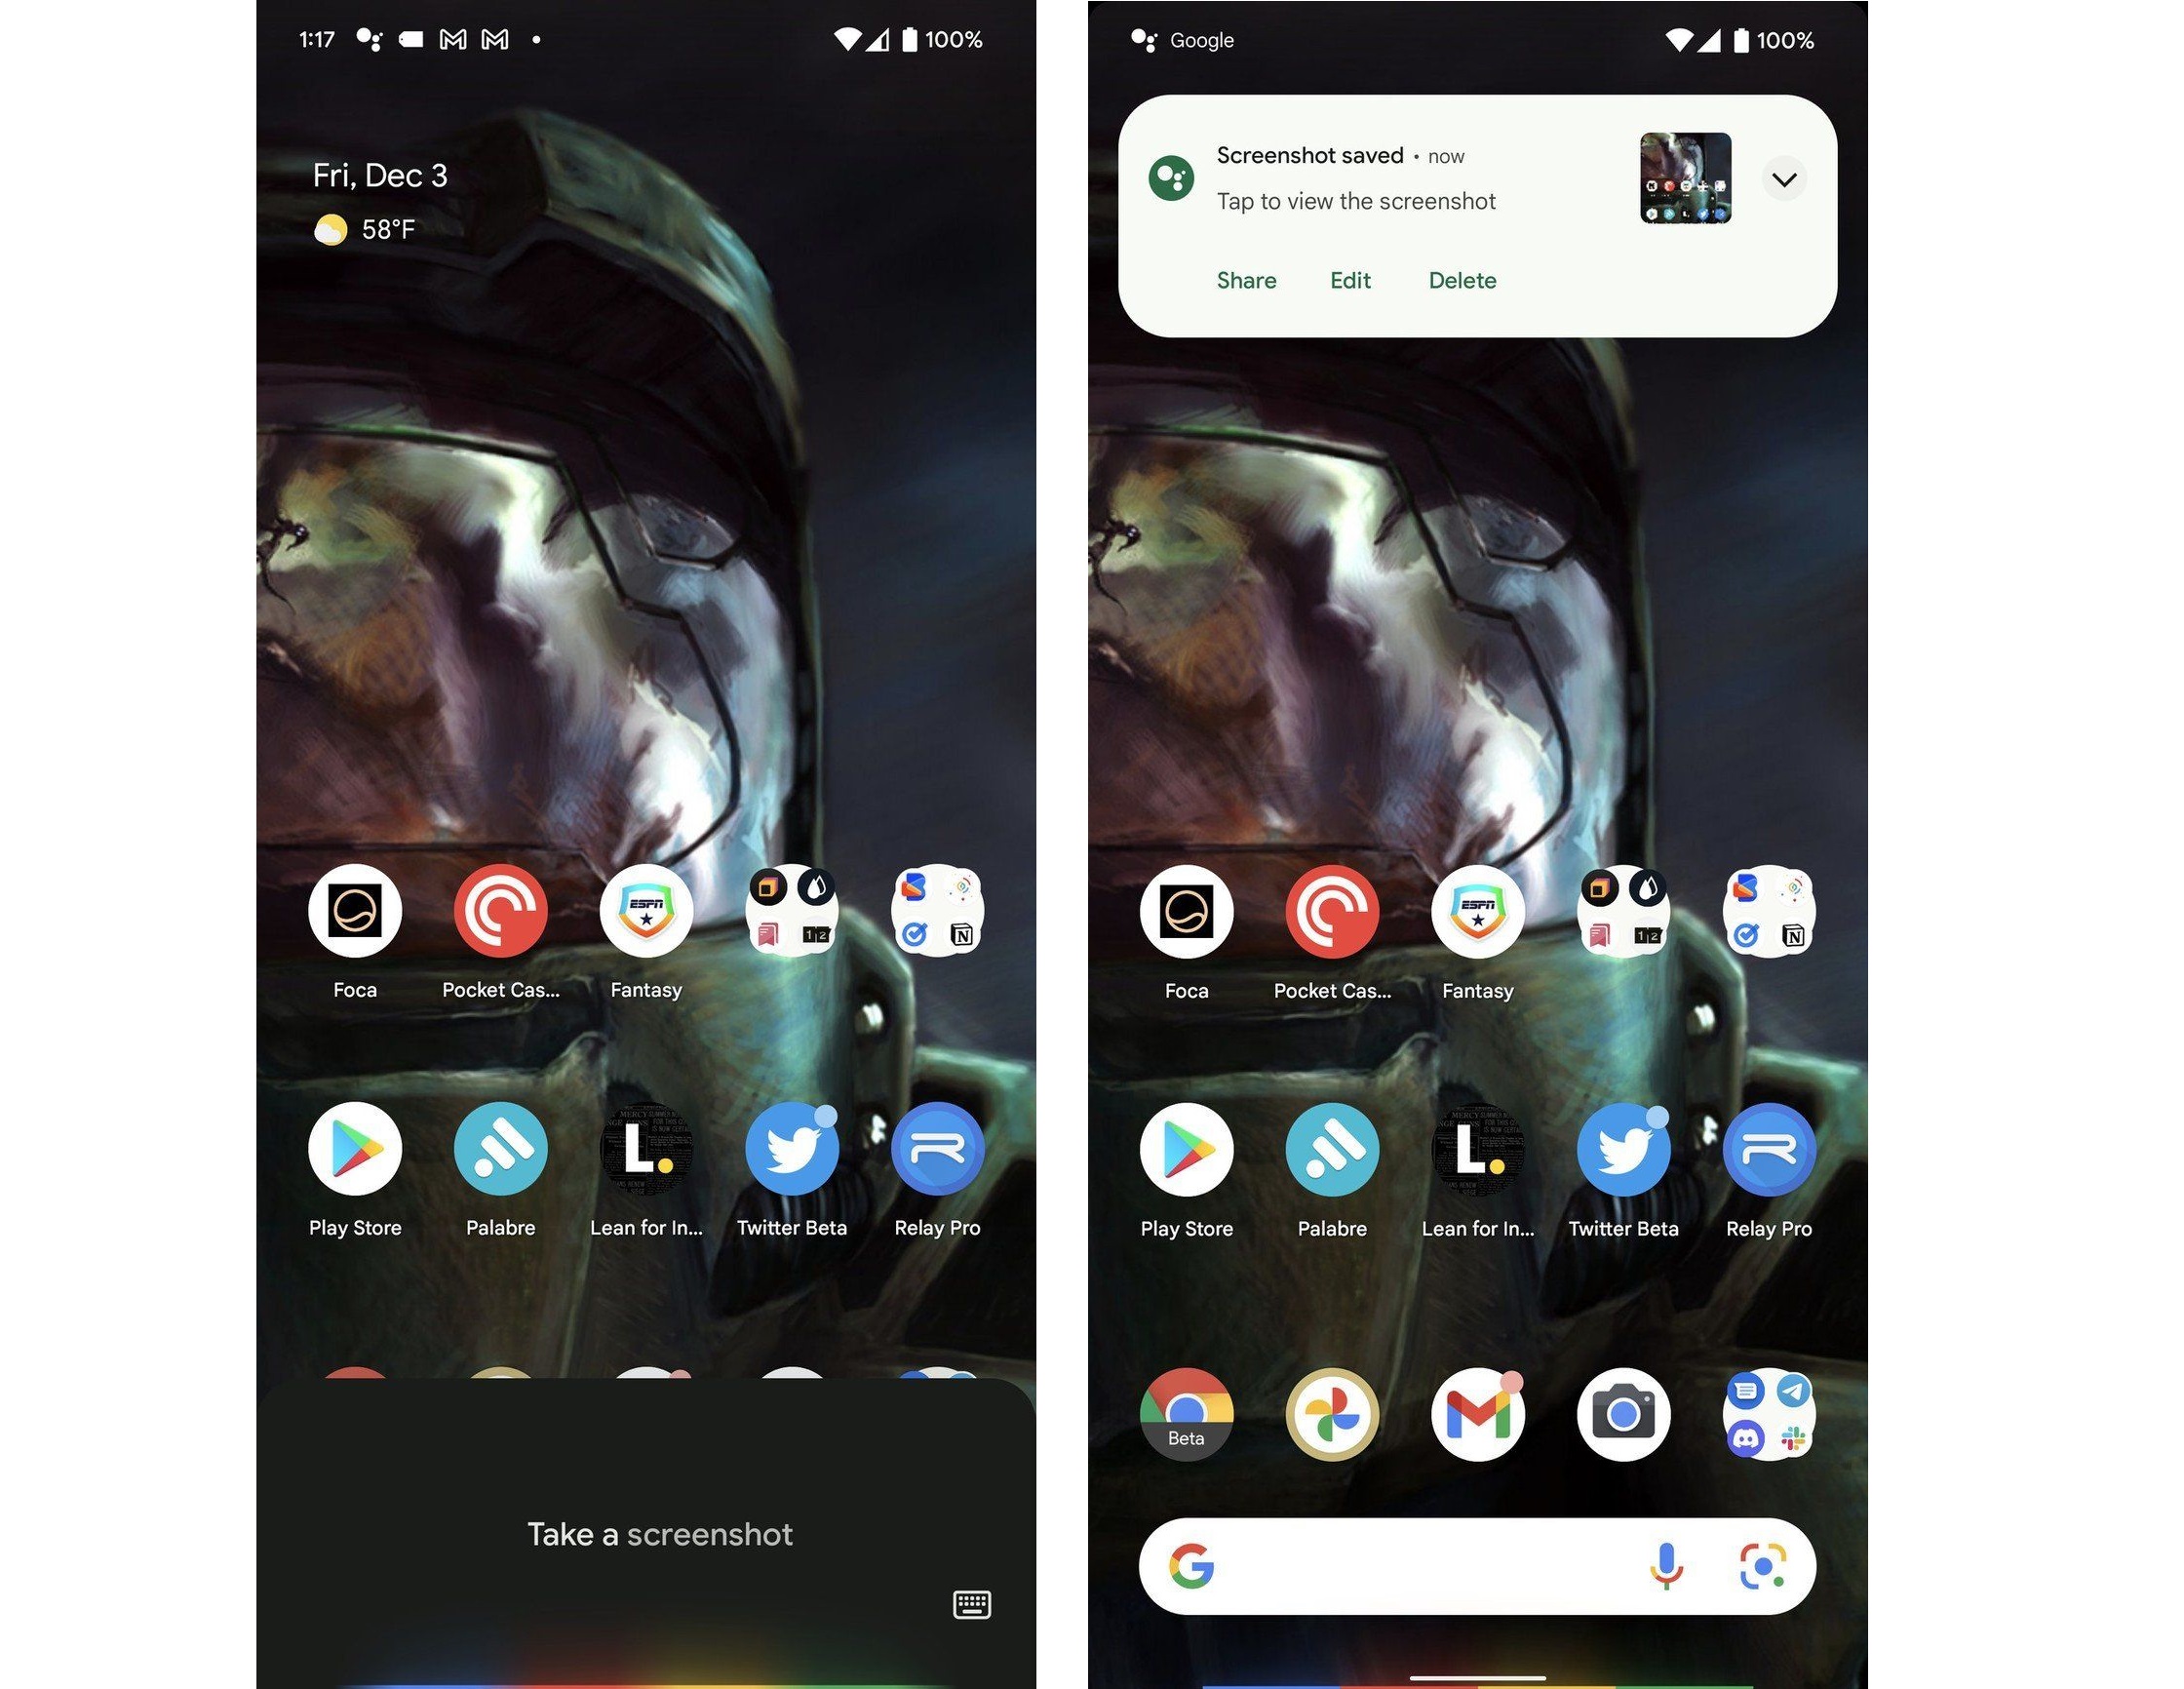 How to take a screenshot on the Google Pixel with Google Assistant